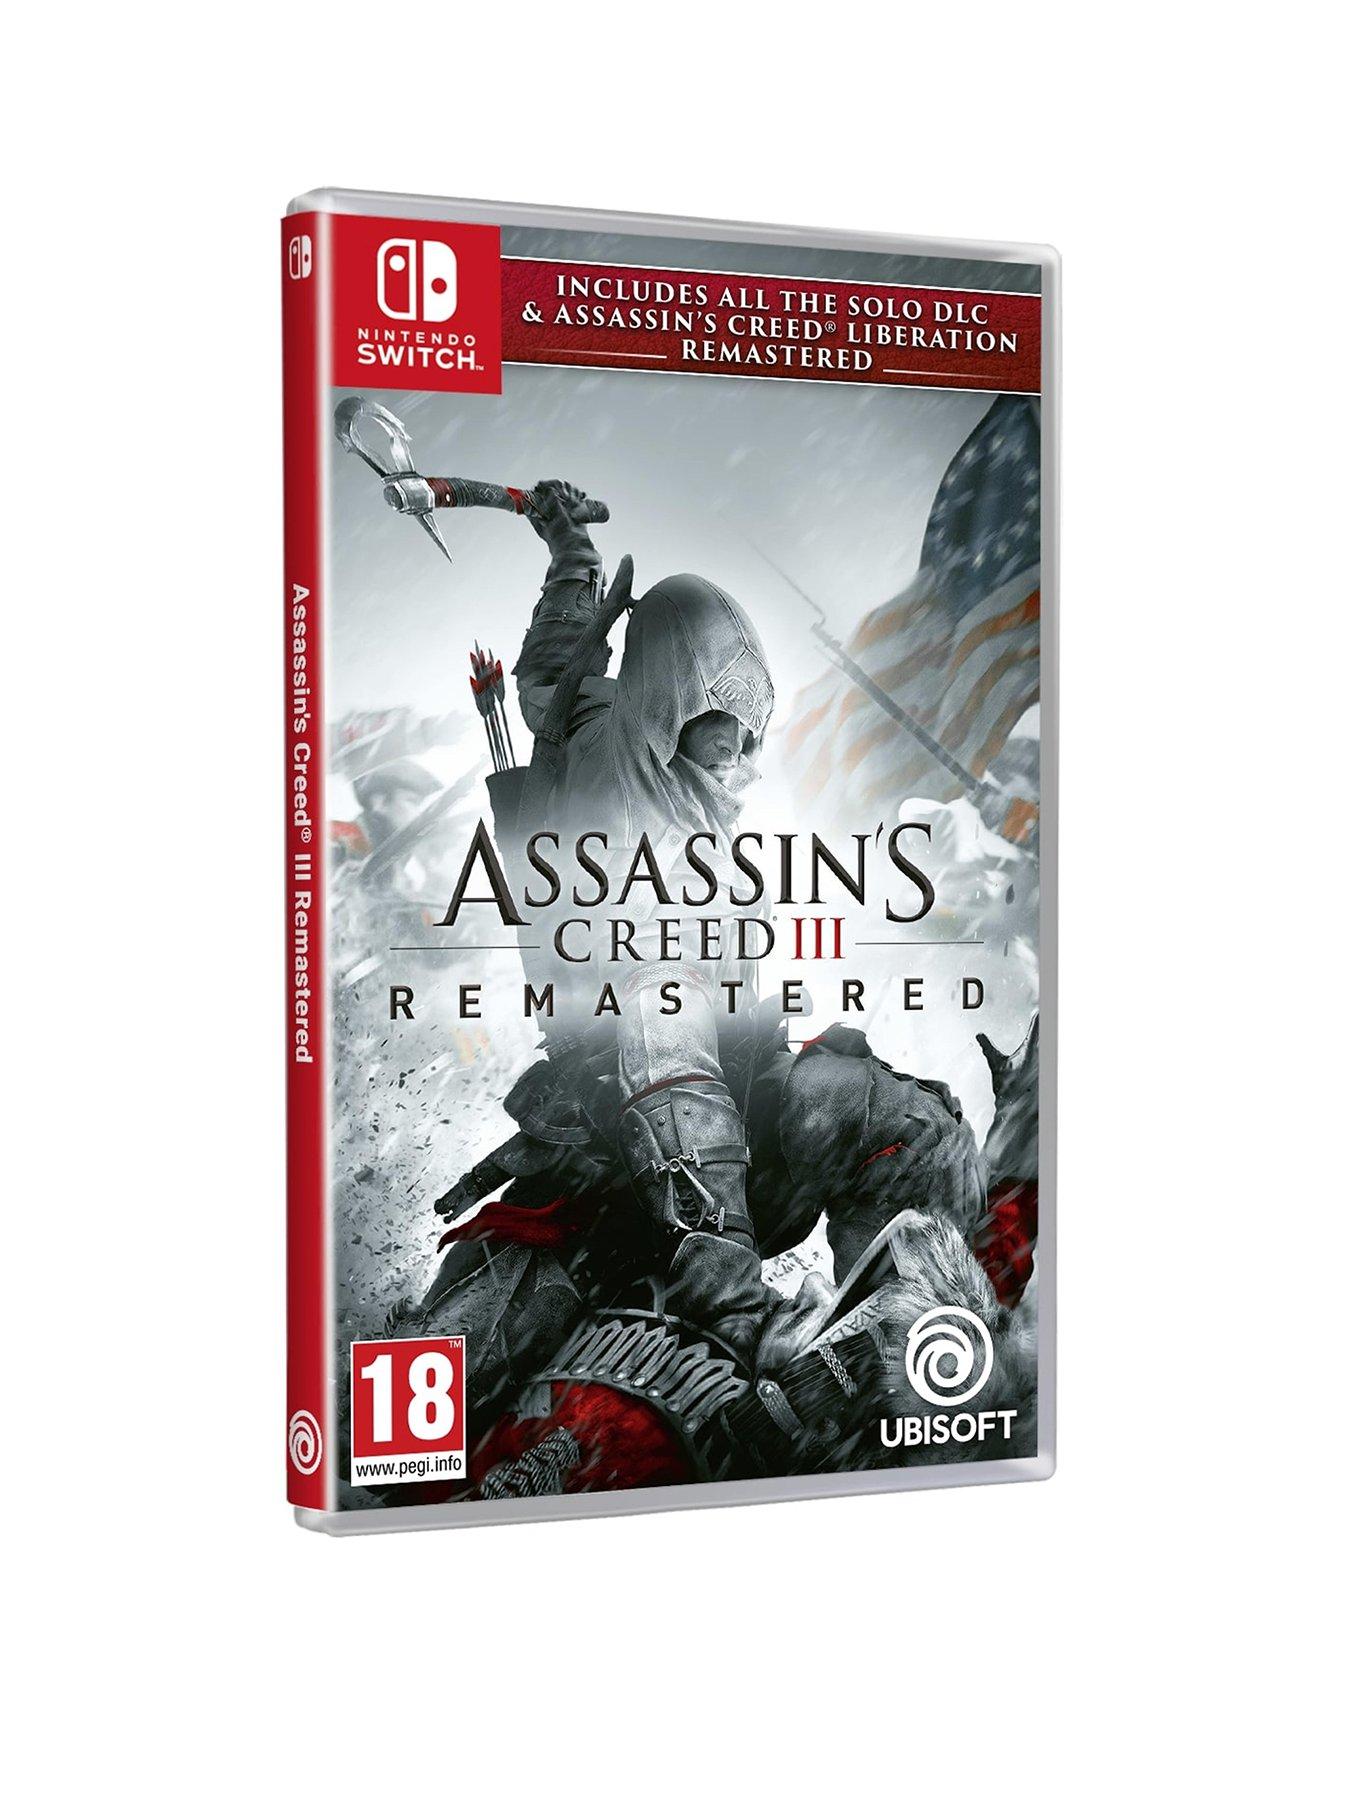 assassin's creed on nintendo switch